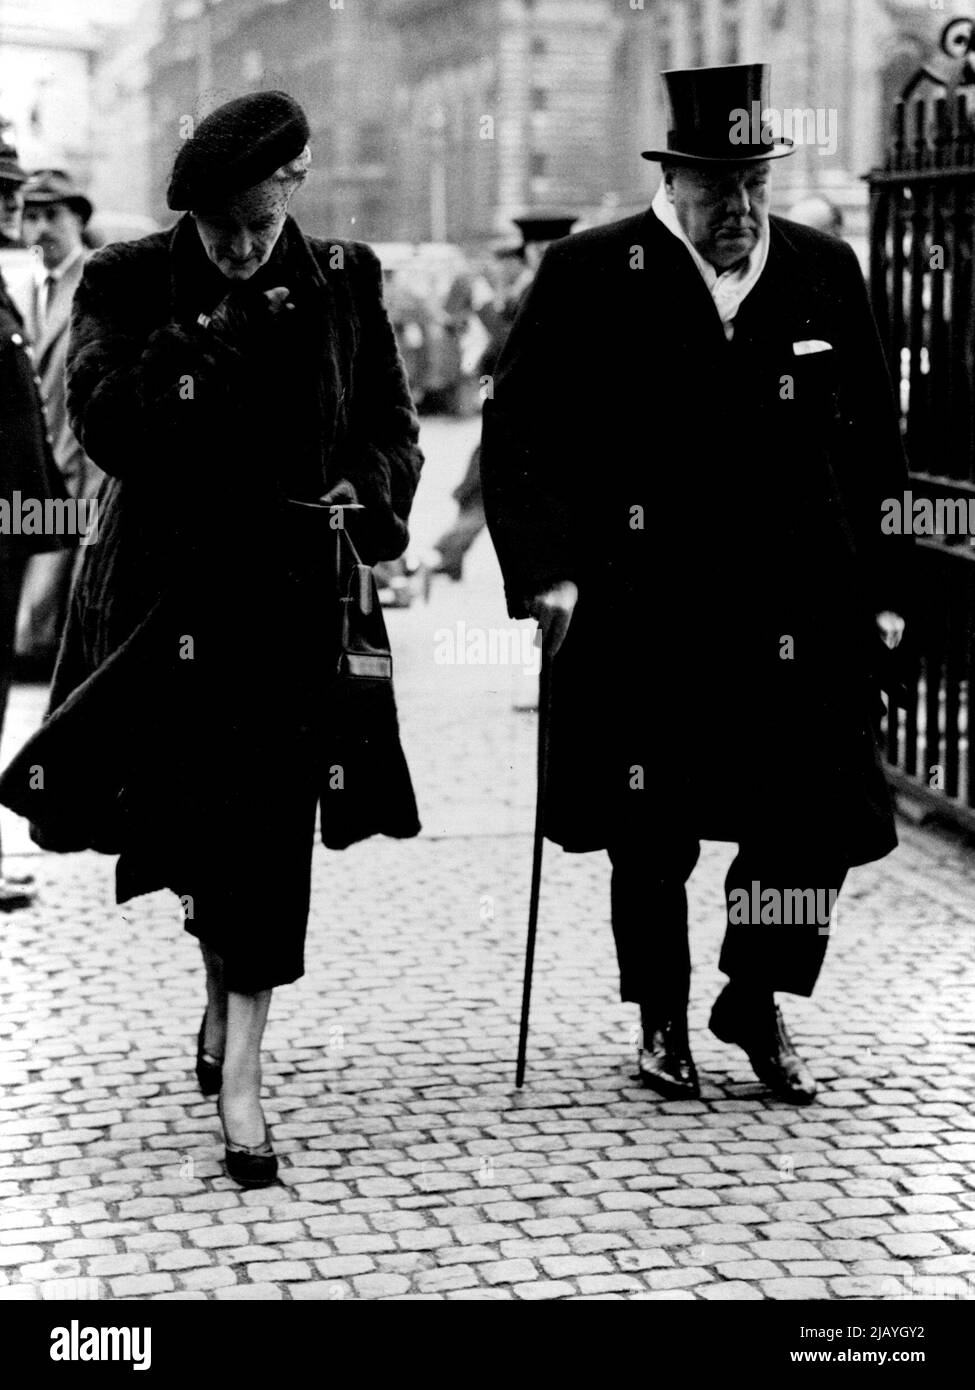 Mr. Churchill at Memorial Service for His Friend: Fields Marshal Smuts - Mr. and Mrs. Winston Churchill leaving Westminster Abbey, London, today after attending the memorial service to another great statesman and a personal friend of Mr. Churchill - the late field, Marshal Smuts. September 26, 1950. (Photo by Paul Popper Ltd.). Stock Photo